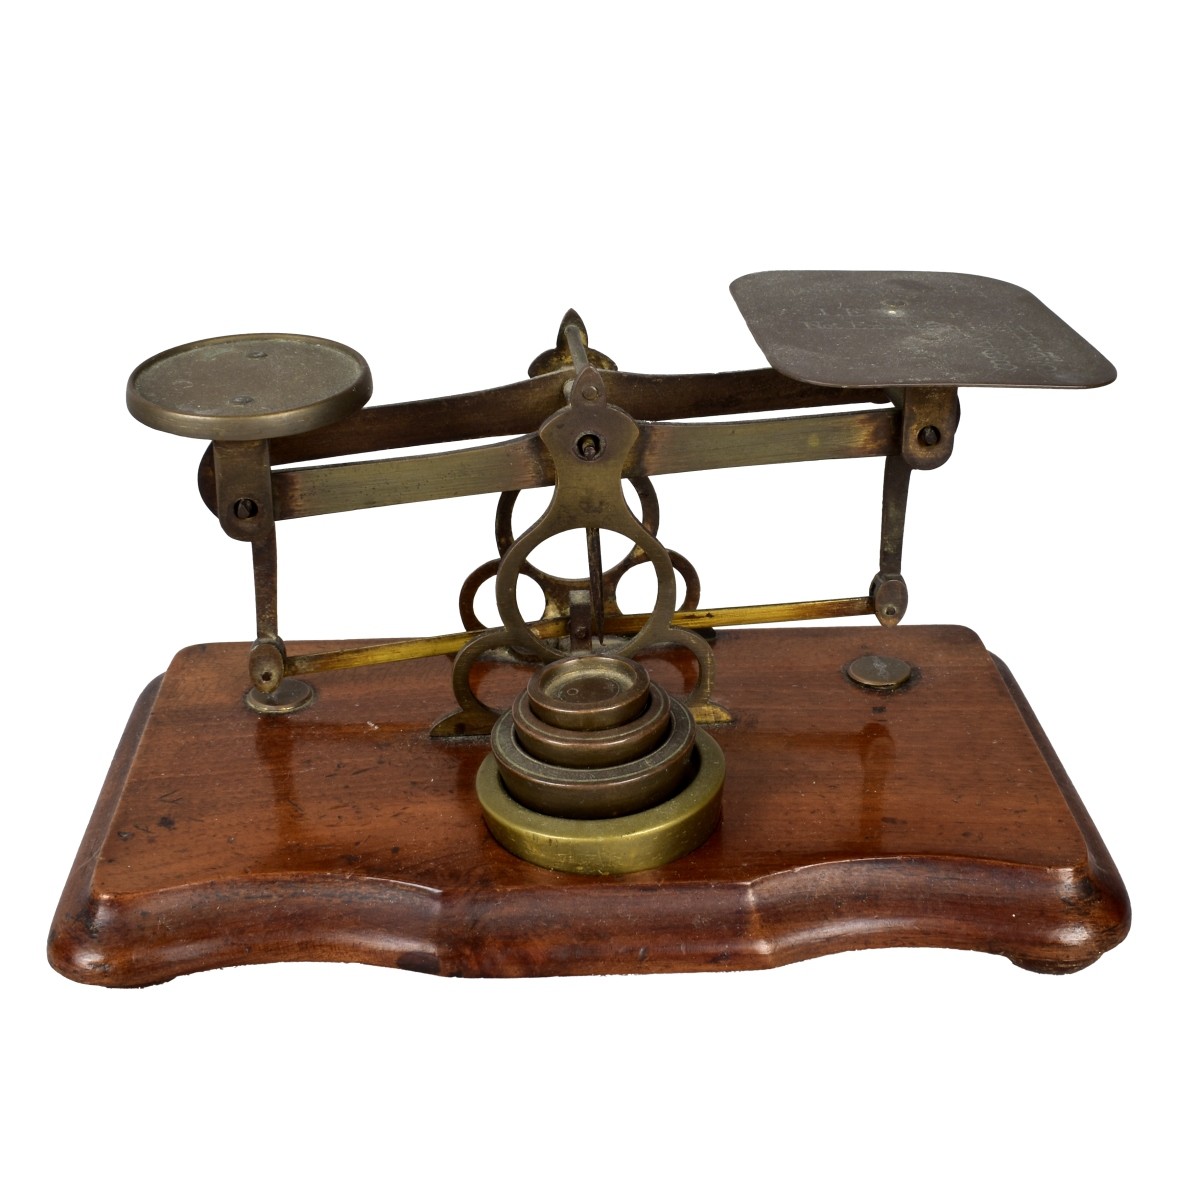 4 Balance Scales with Weights